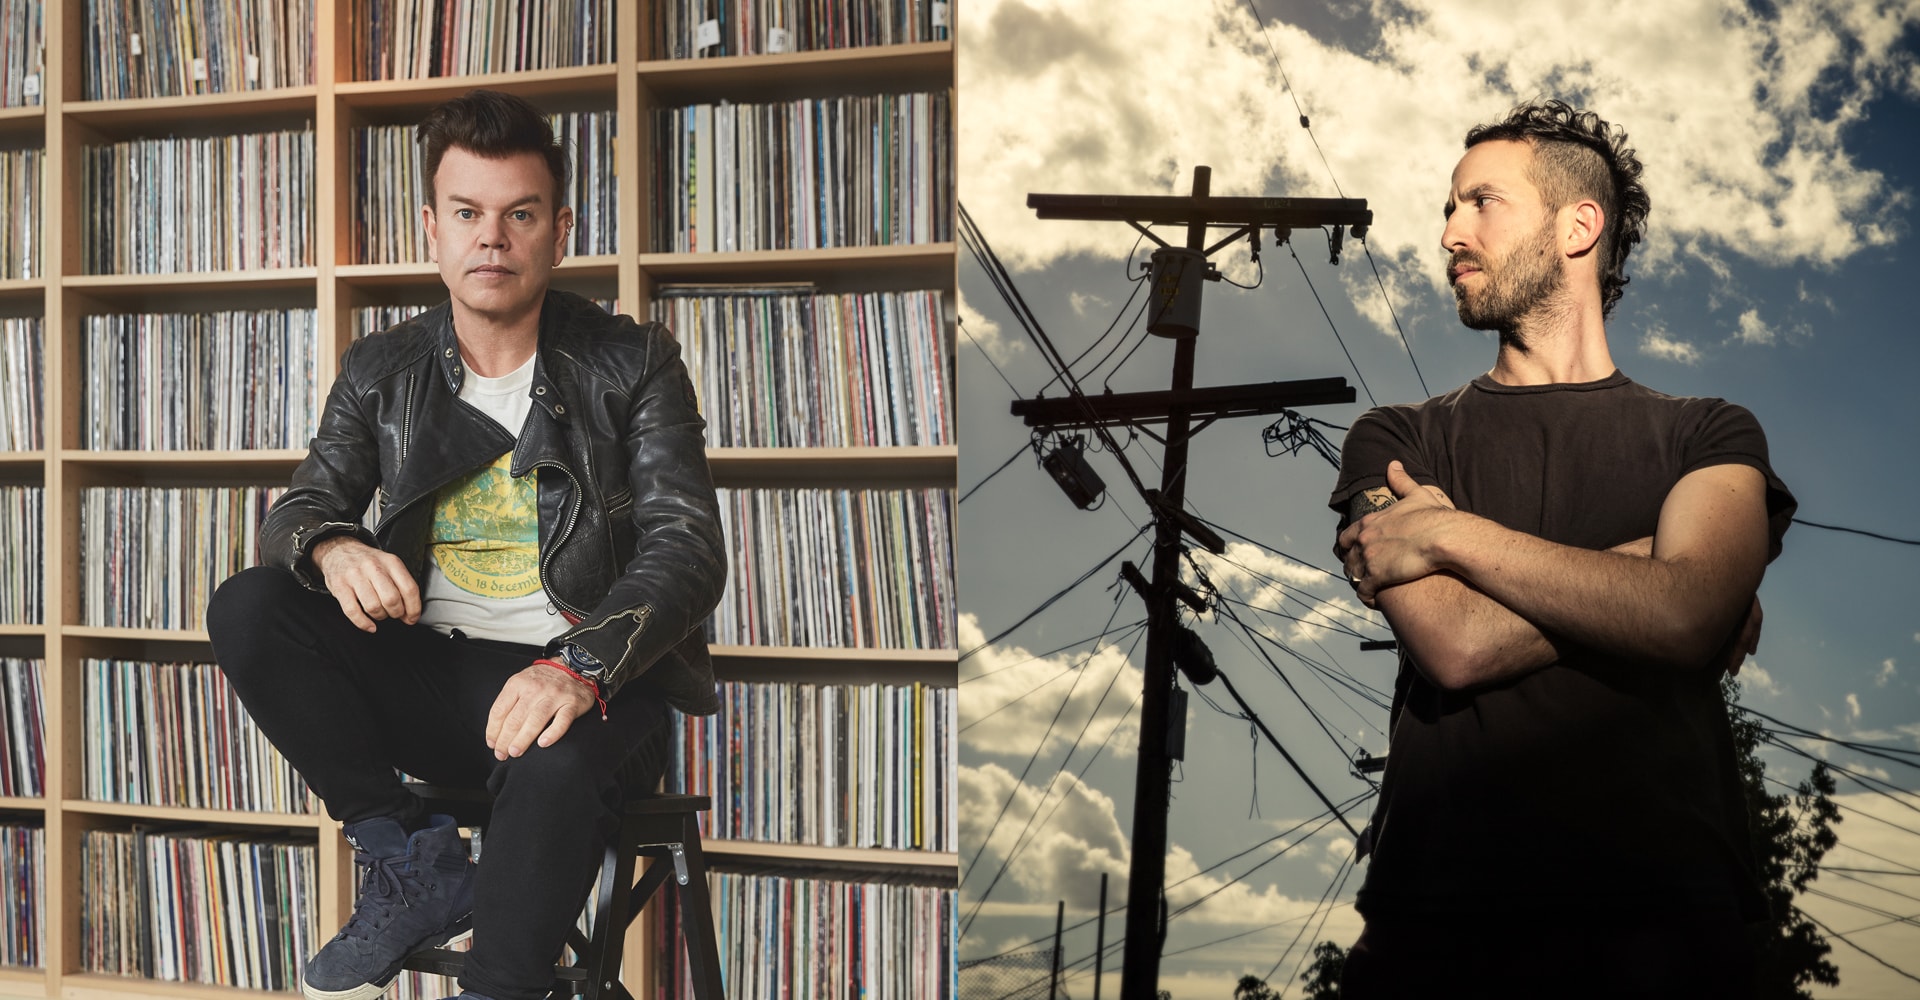 Sound in Focus Concerts: Paul Oakenfold with Mondo Cozmo